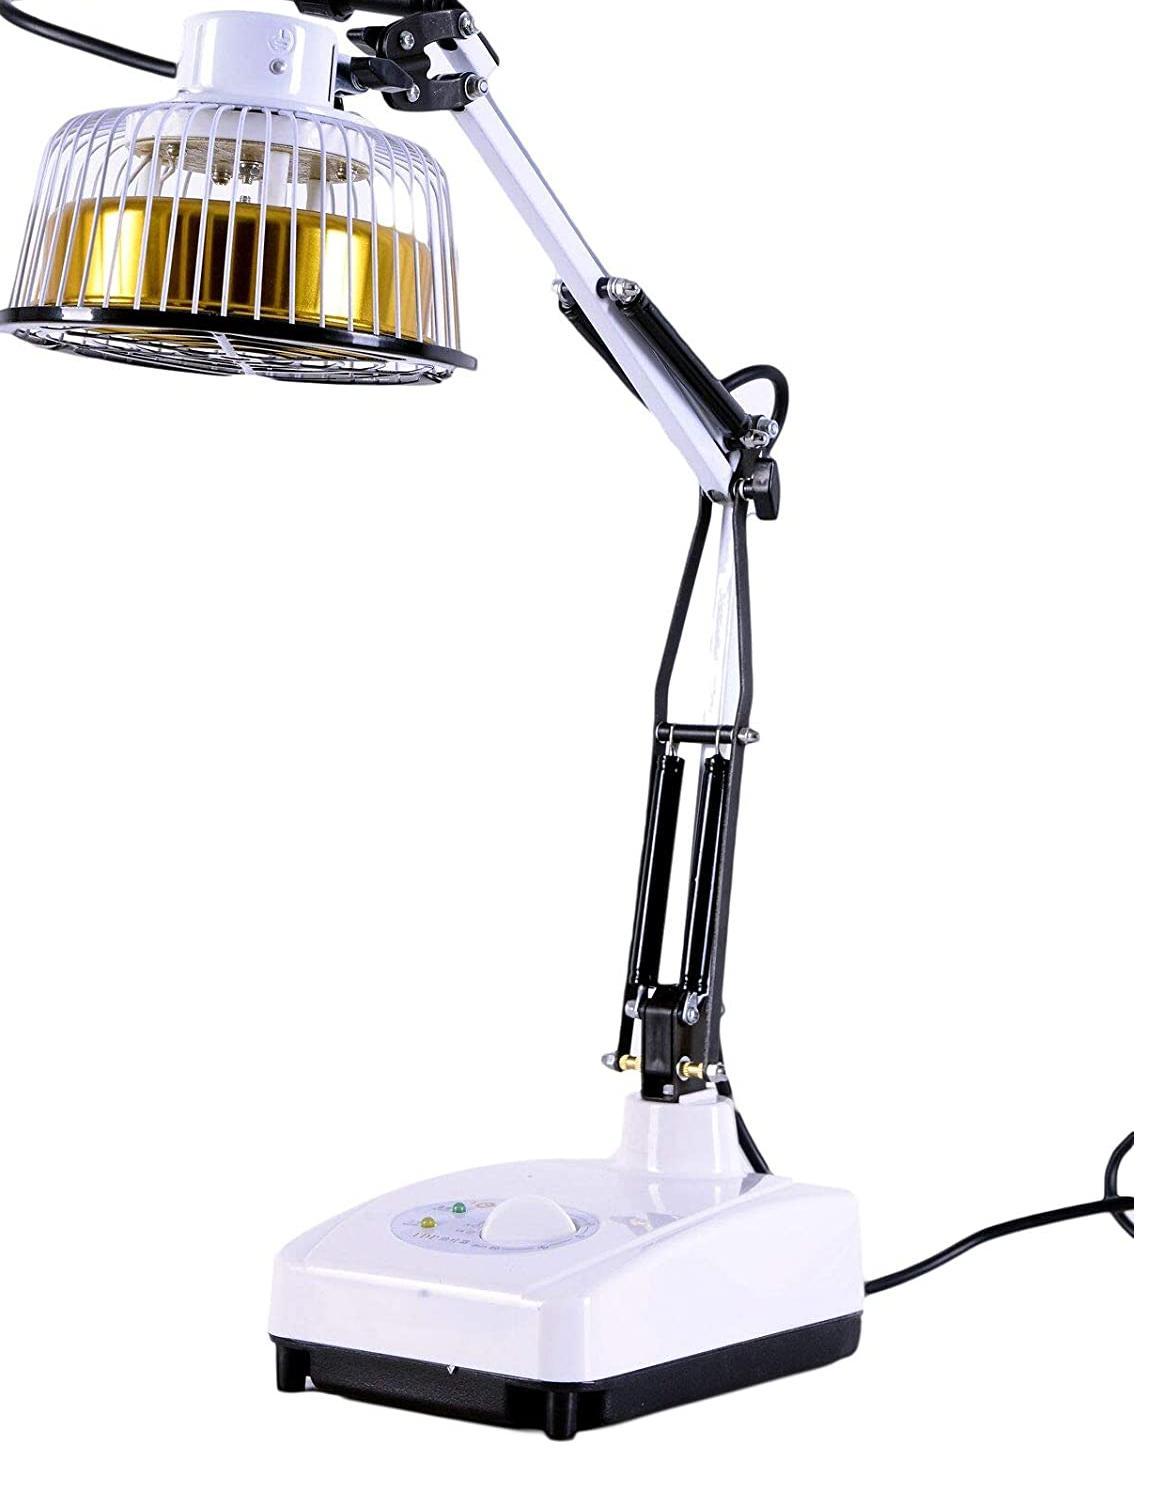 Doc.Royal New The SpecialElectromagneticTherapeuticApparatusDeskTopTDP Lamps (CQG-111A) $132.99 MSRP